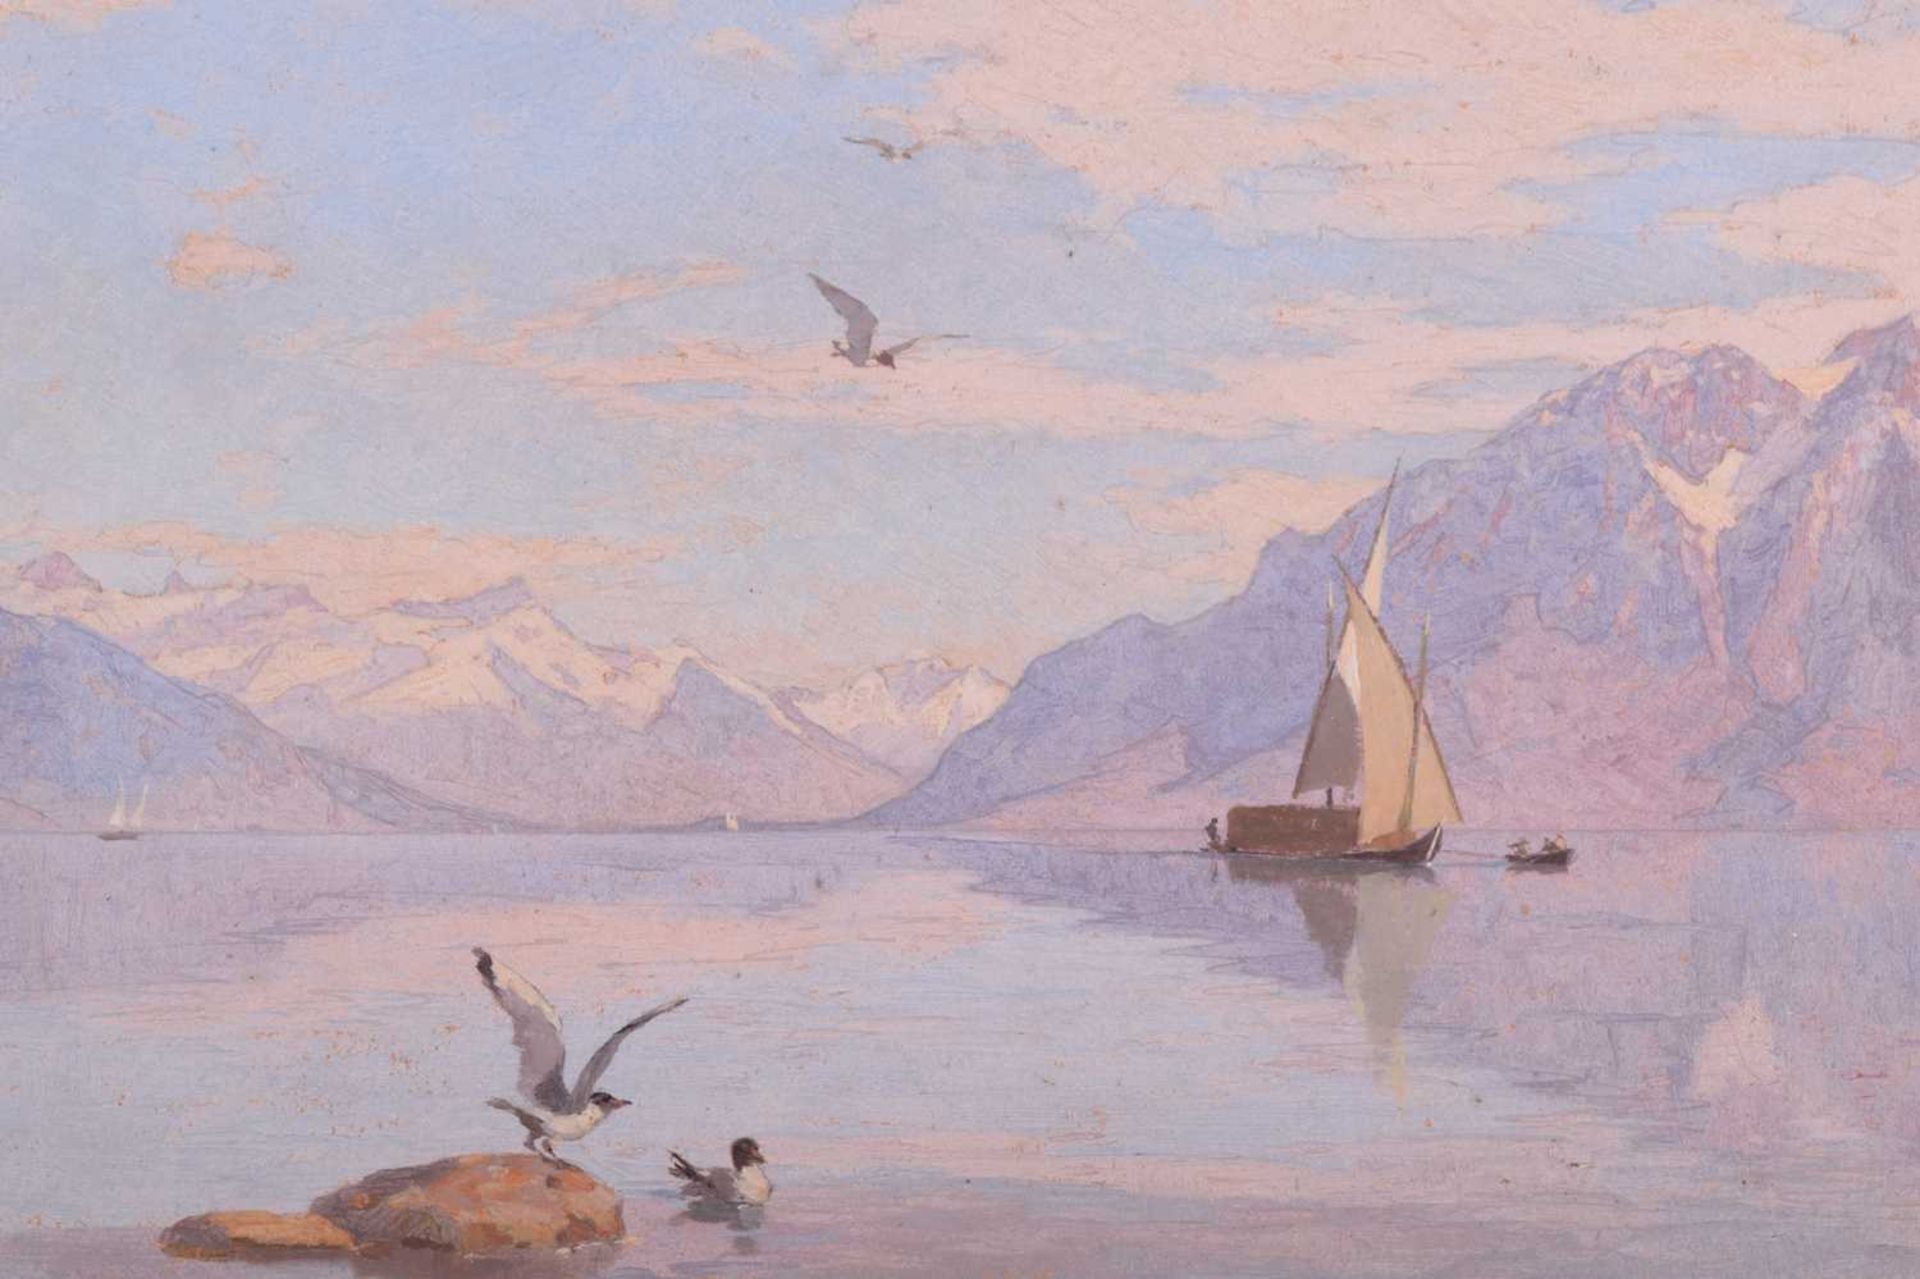 François Bocion (1828 - 1890), Sailing vessel on Lake Geneva, signed and dated 1860, oil on paper, - Image 3 of 11